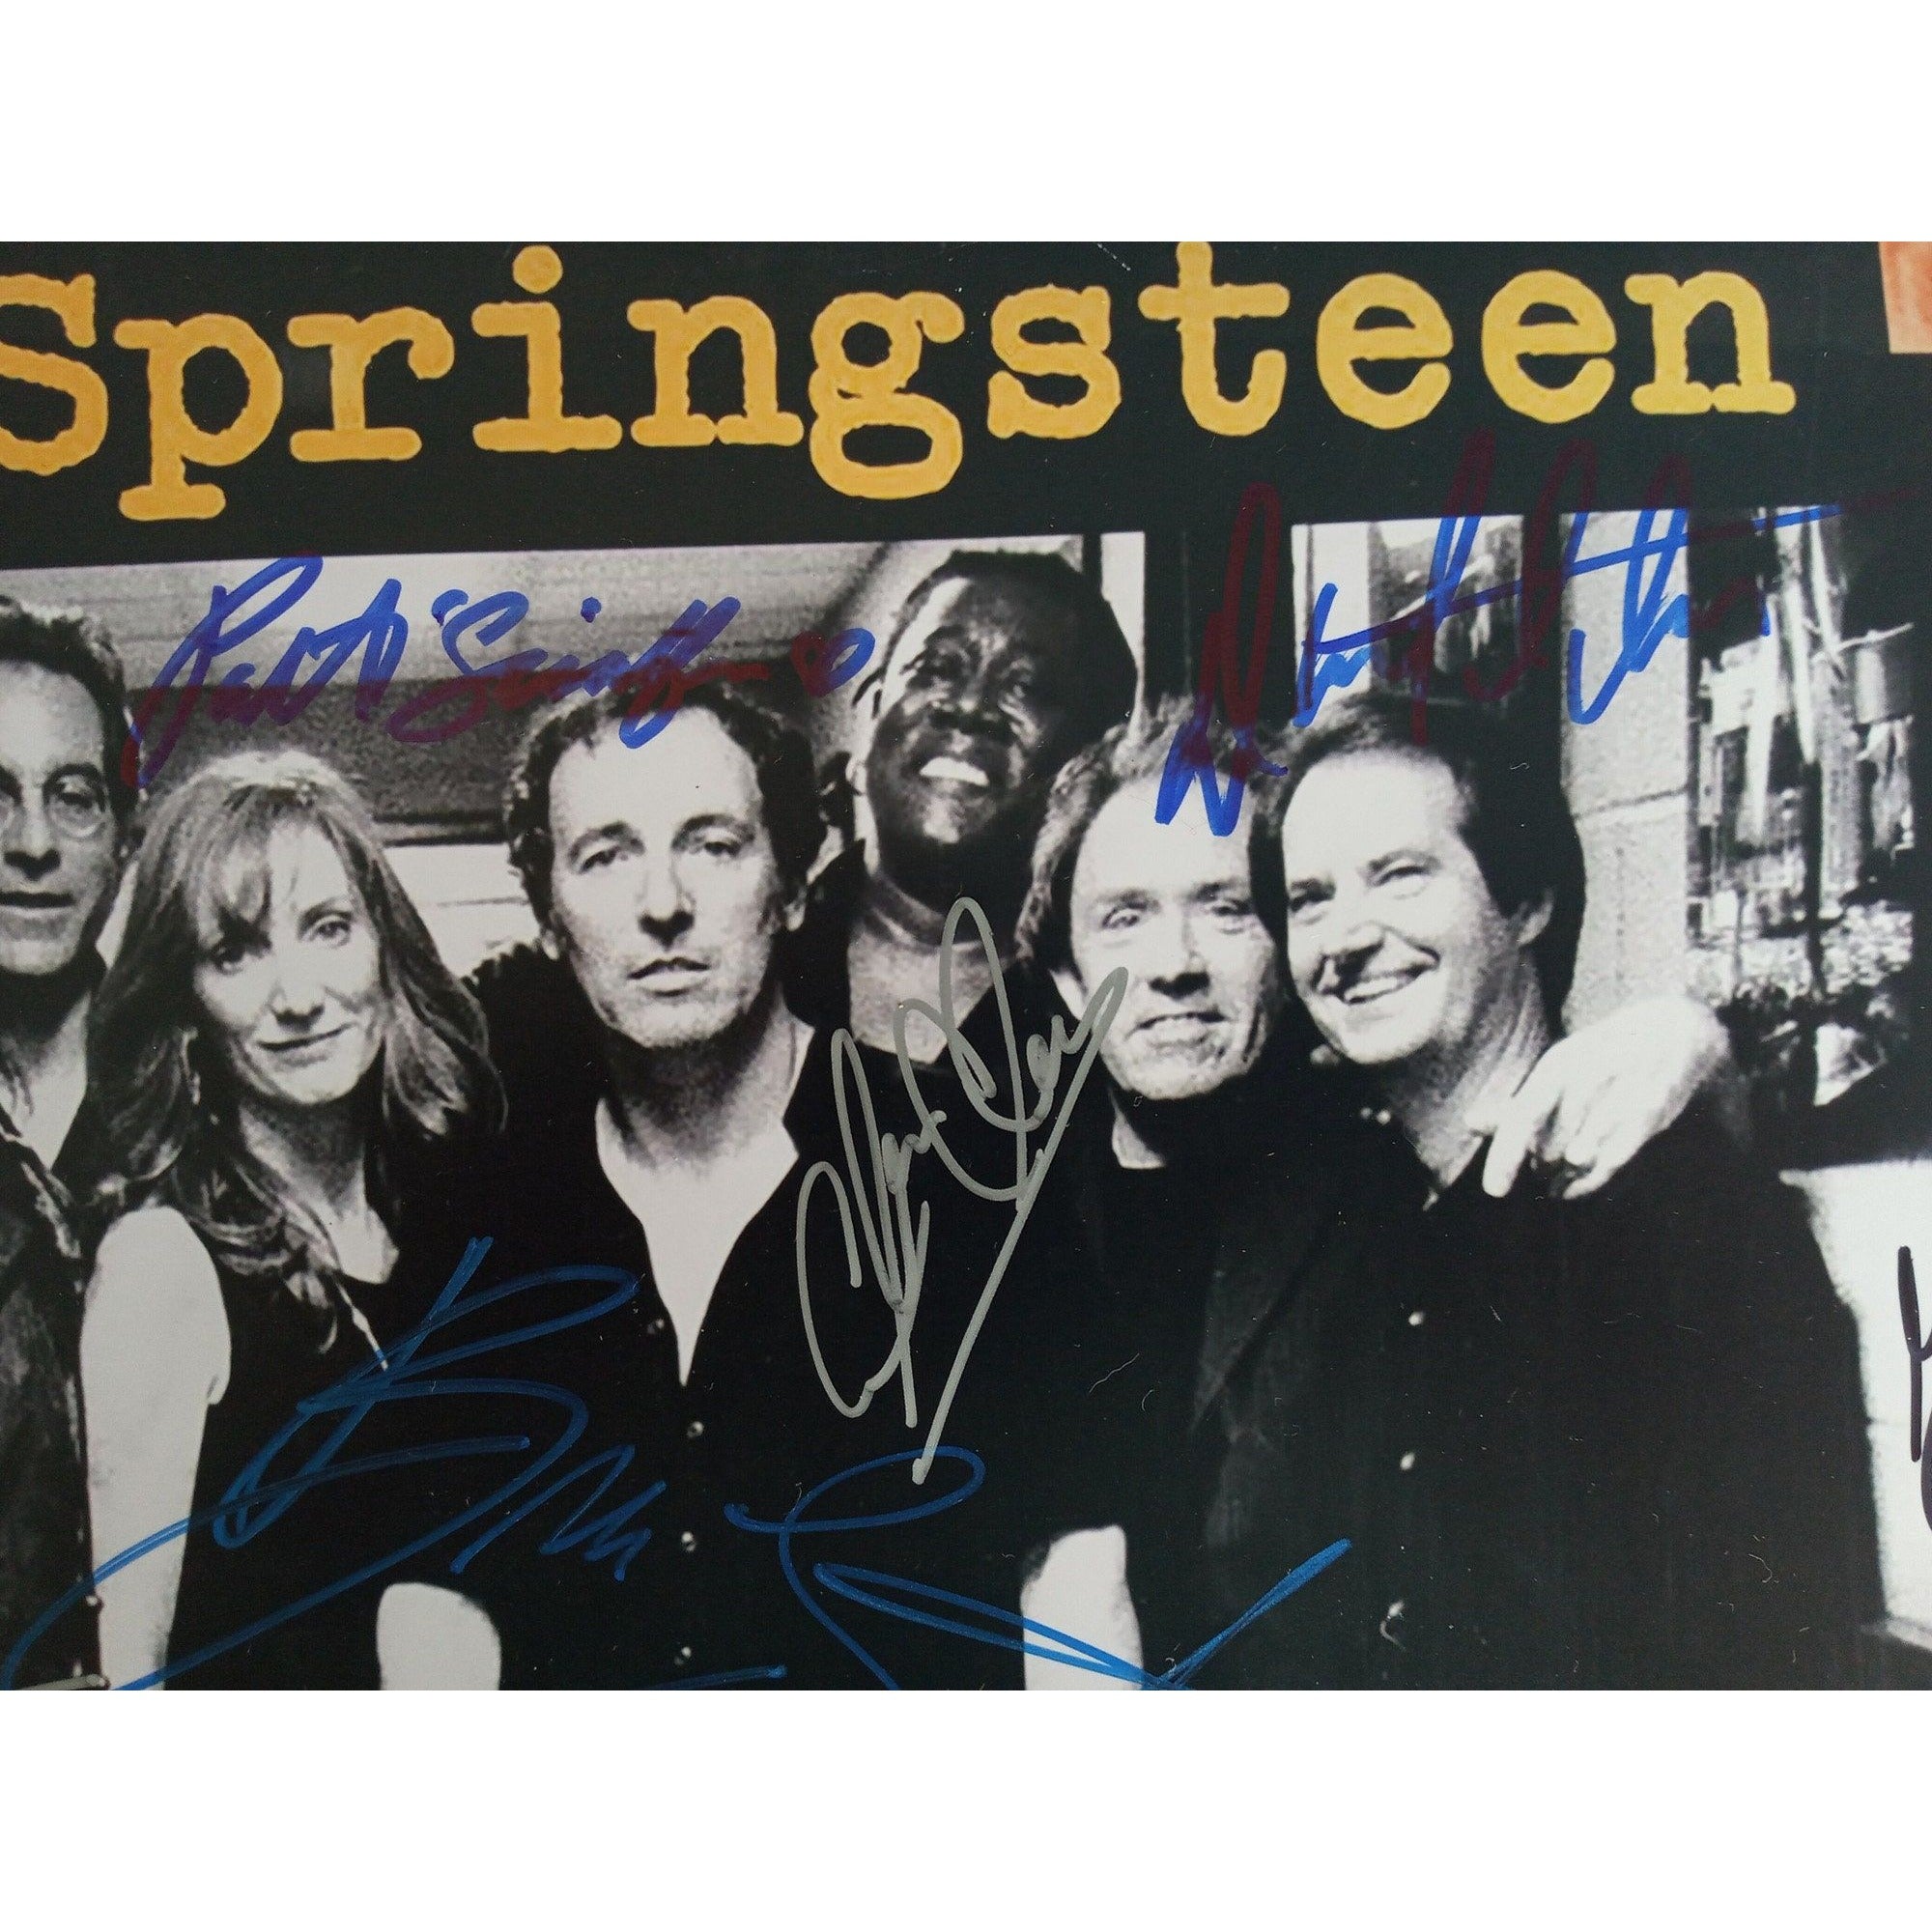 Bruce Springsteen, Clarence Clemons and the E Street Band 11x14 photo signed with proof